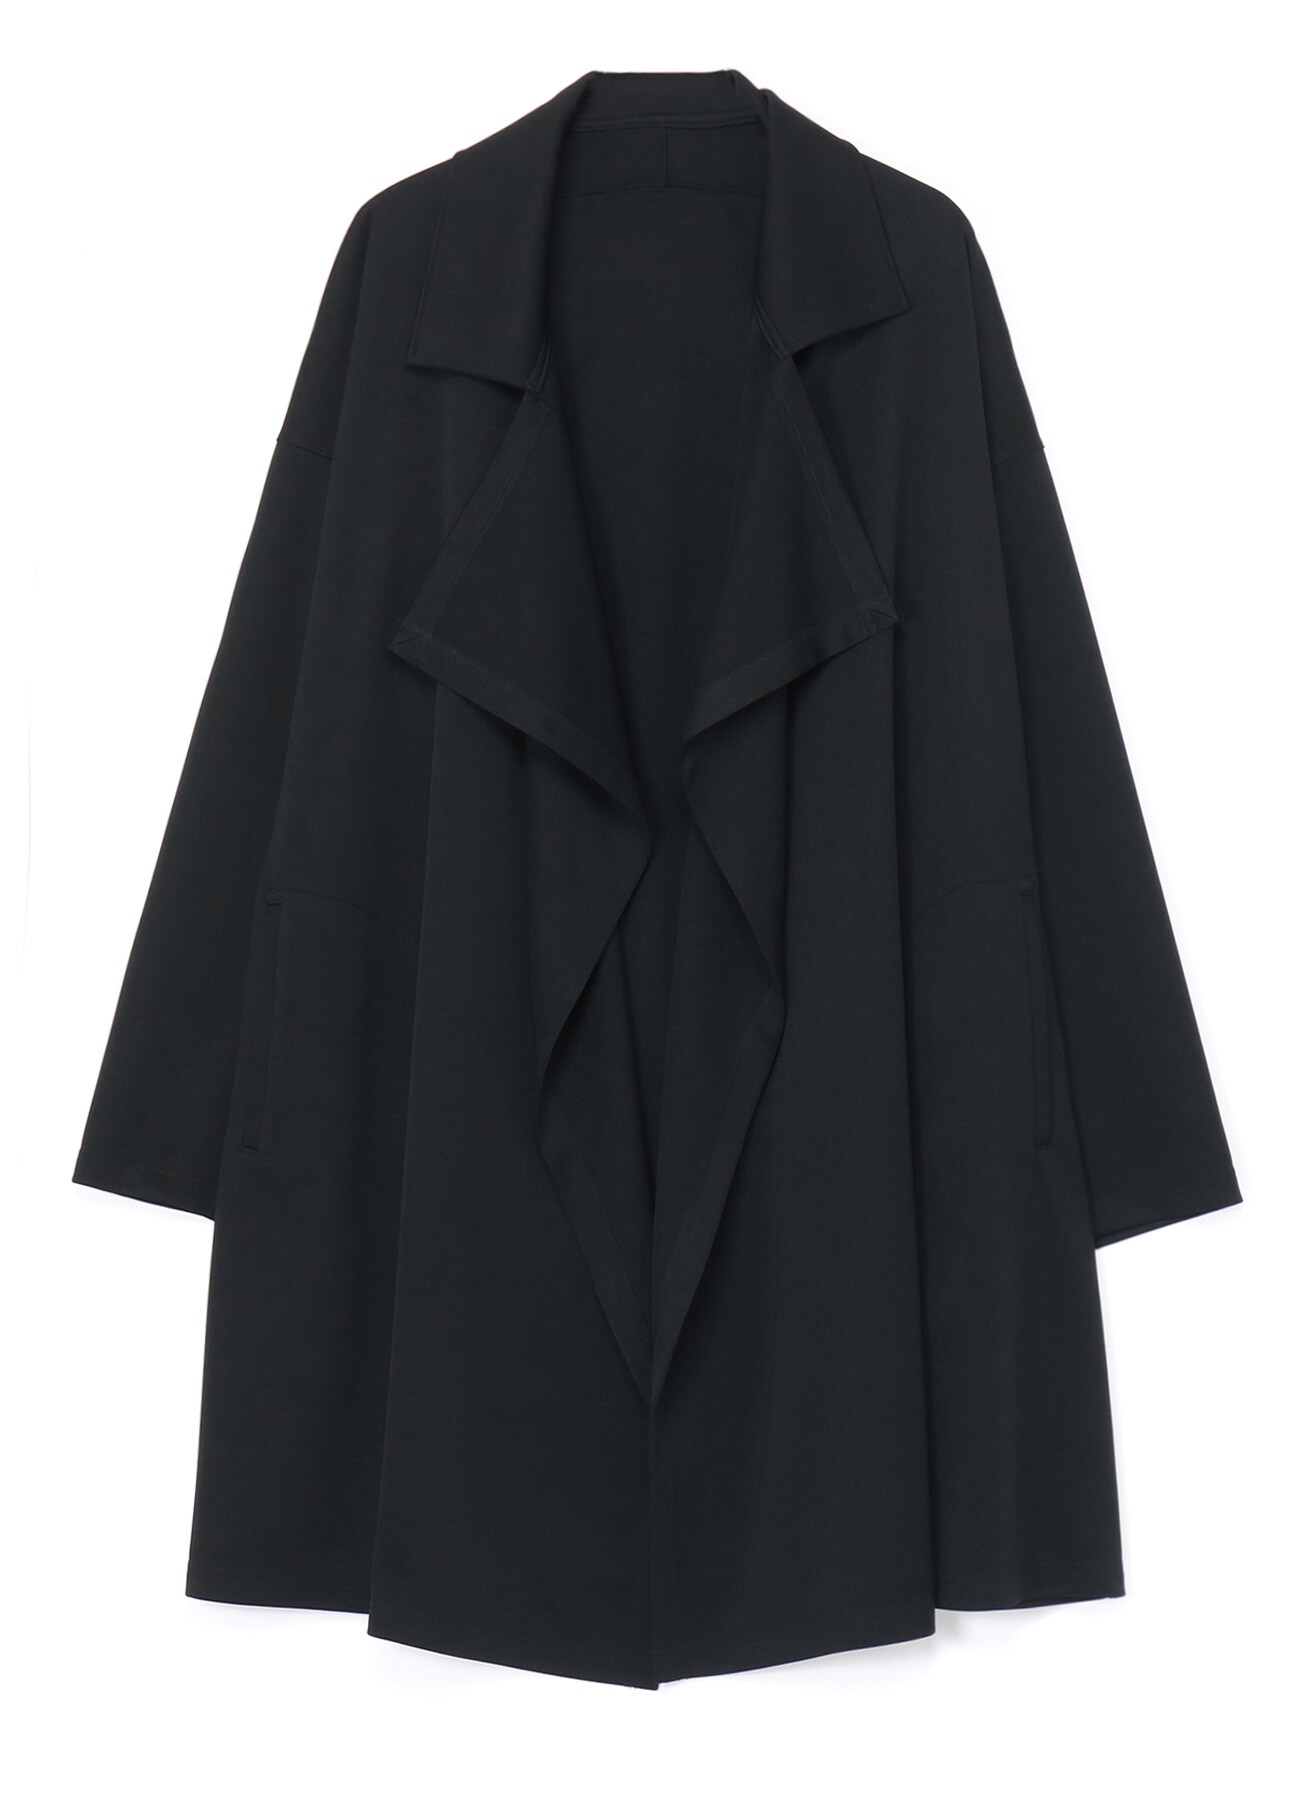 SMOOTH POLYESTER FLAME DOUBLE DRAPE COAT